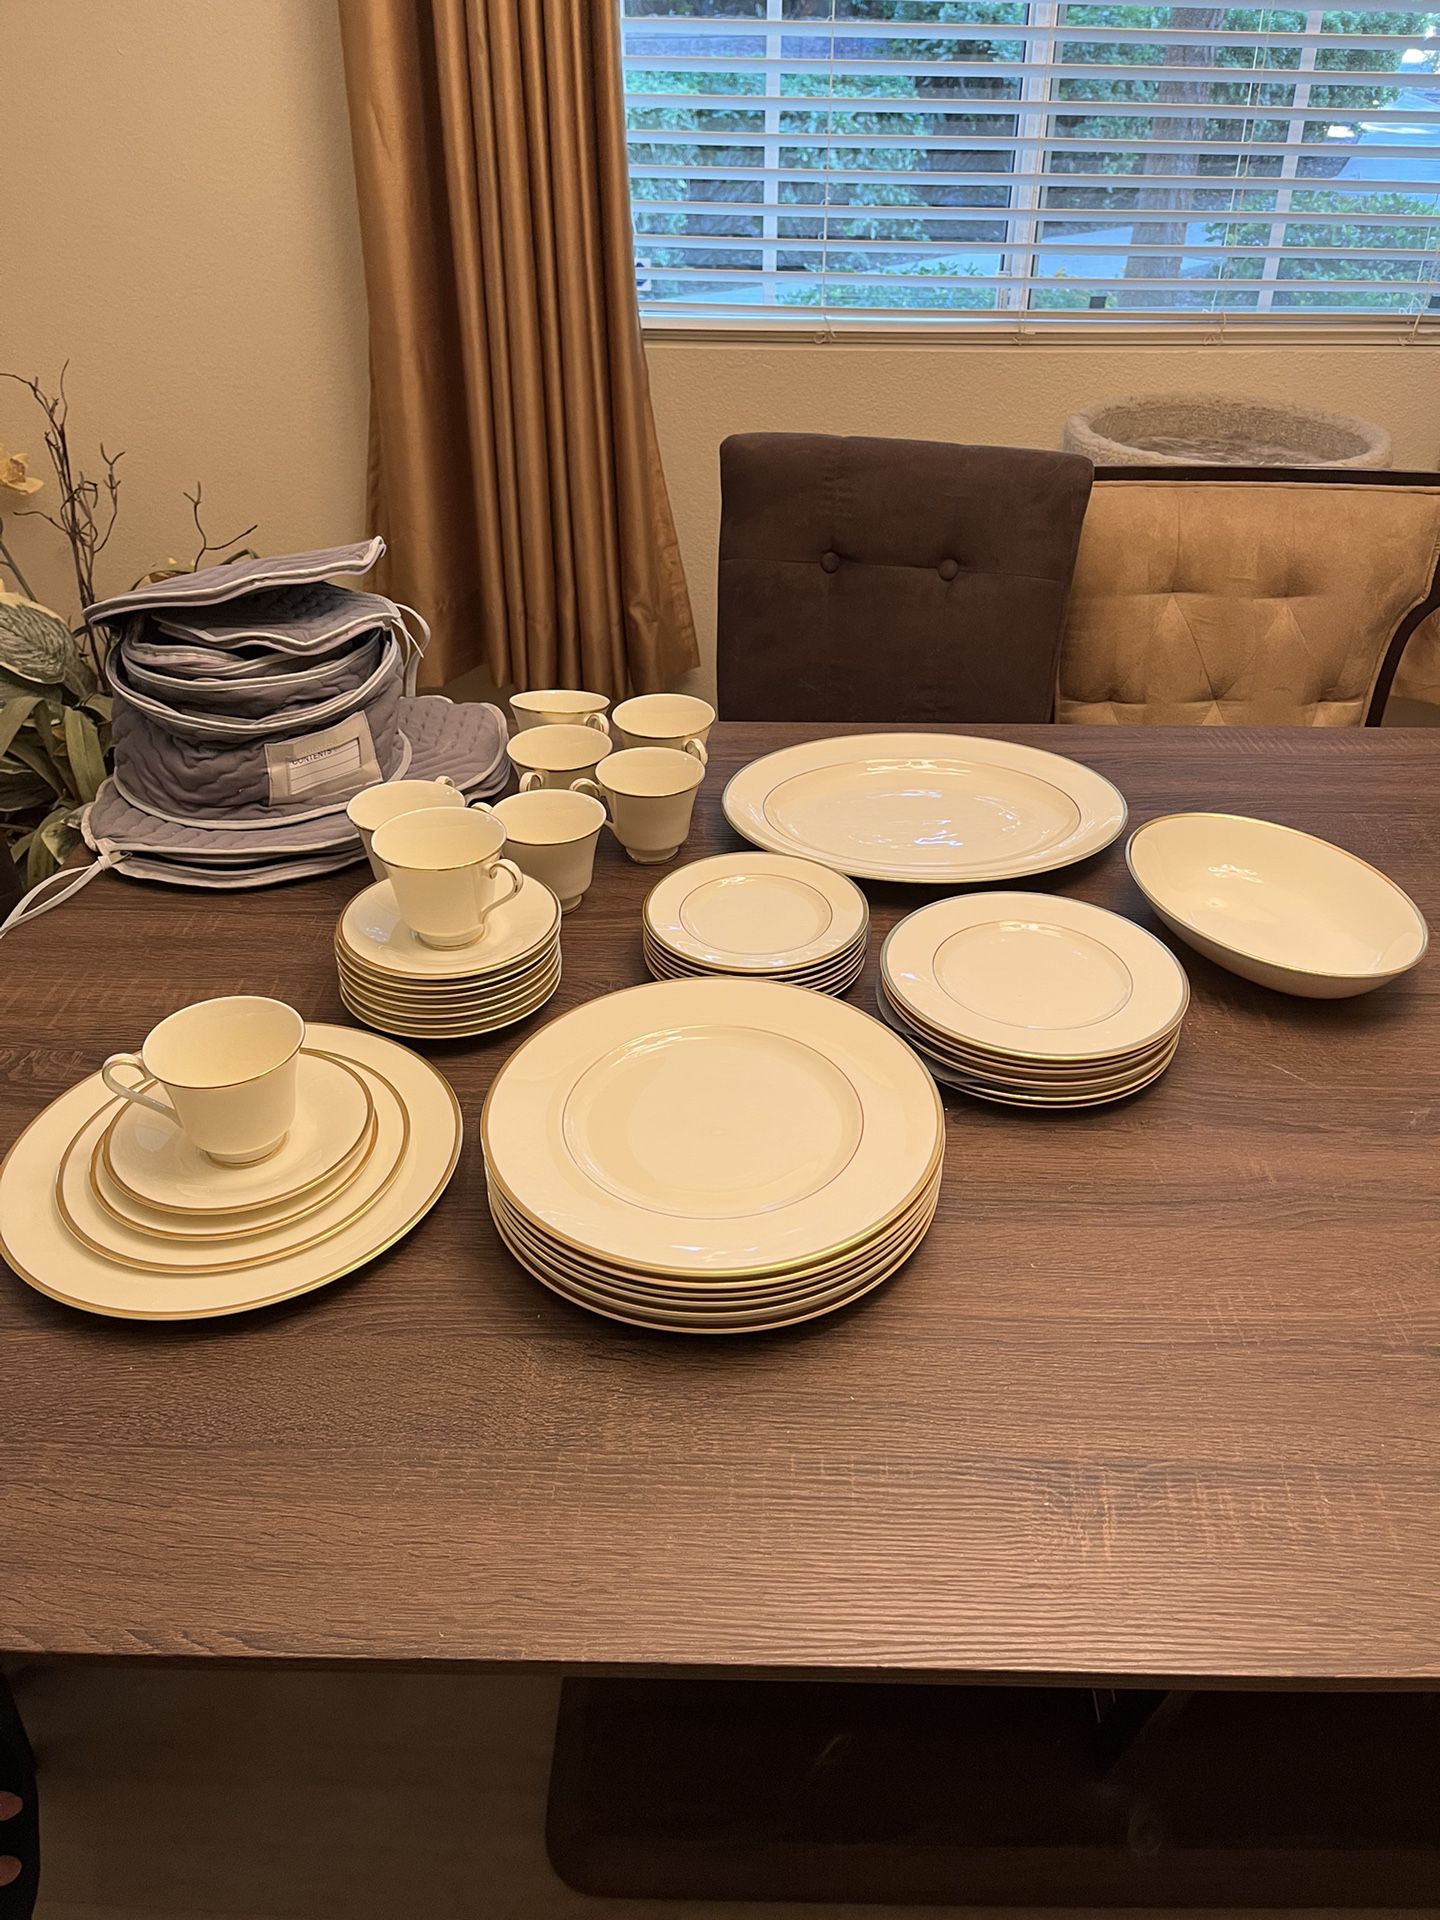 Complete Royal Daulton Bone China Set, Romance Collection, With Real Gold Rims. Service For 8.  